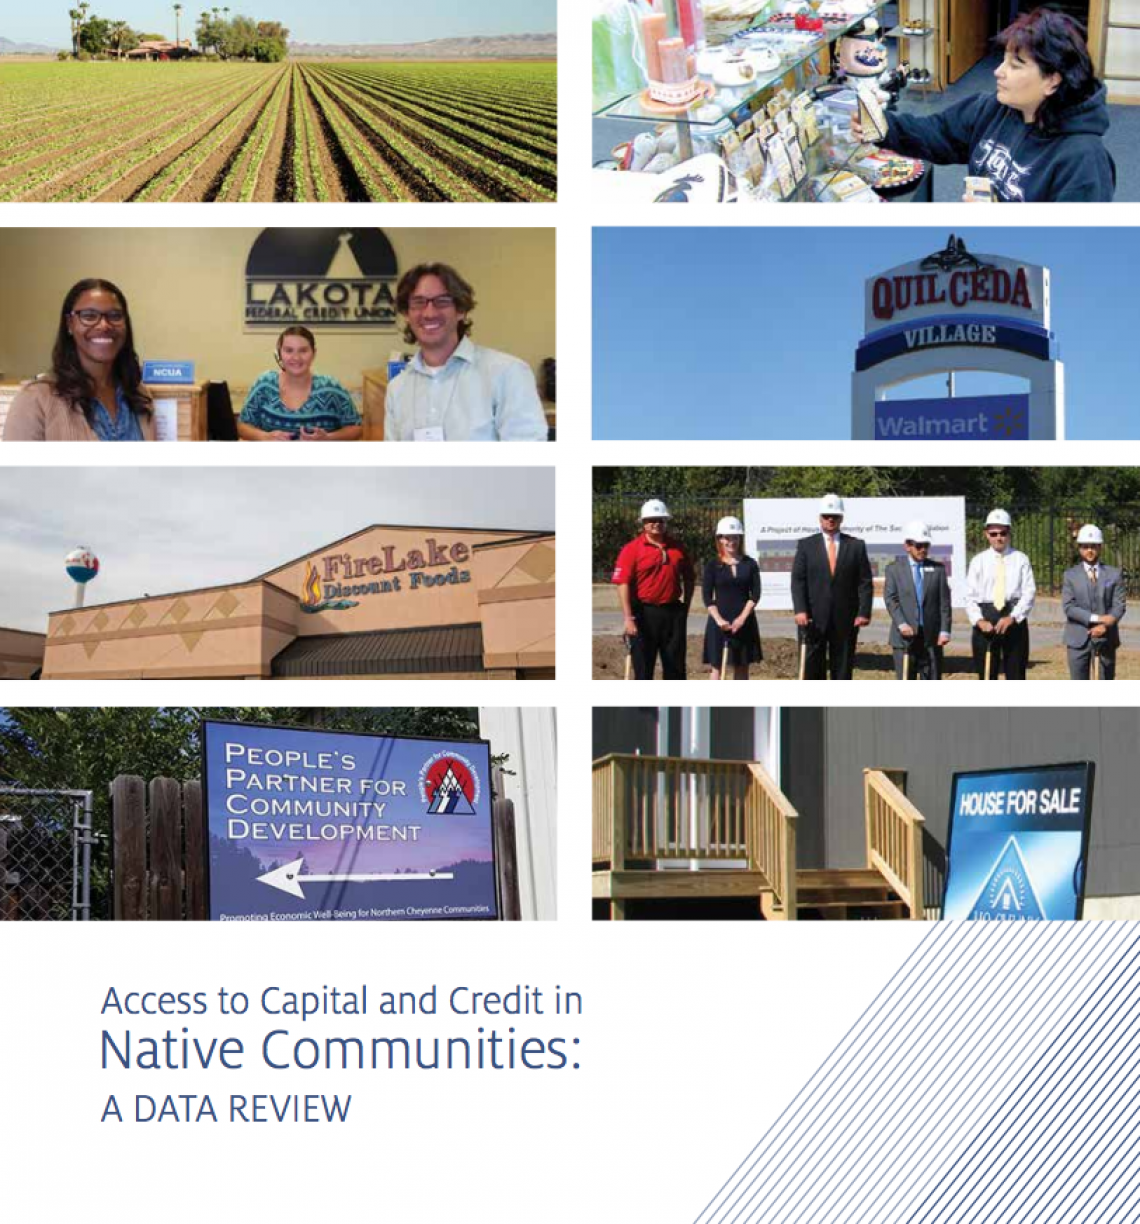 Access to Capital and Credit in Native Communities: A Data Review